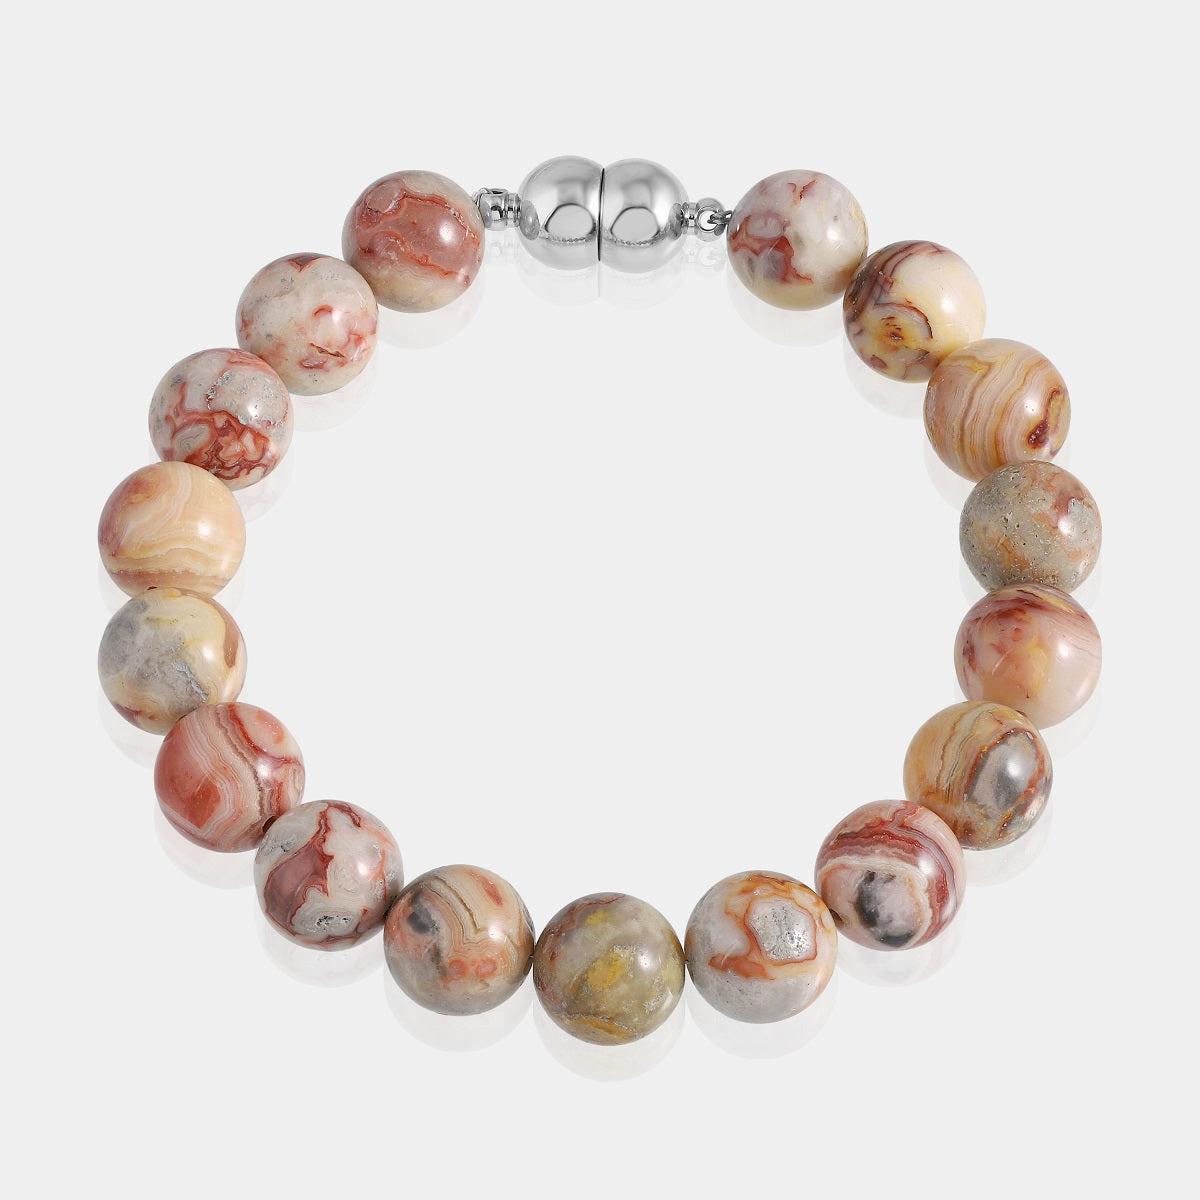 A detailed shot of the magnetic lock mechanism on the crazy lace agate gemstone bracelet, highlighting the brass accents and the convenient clasp.